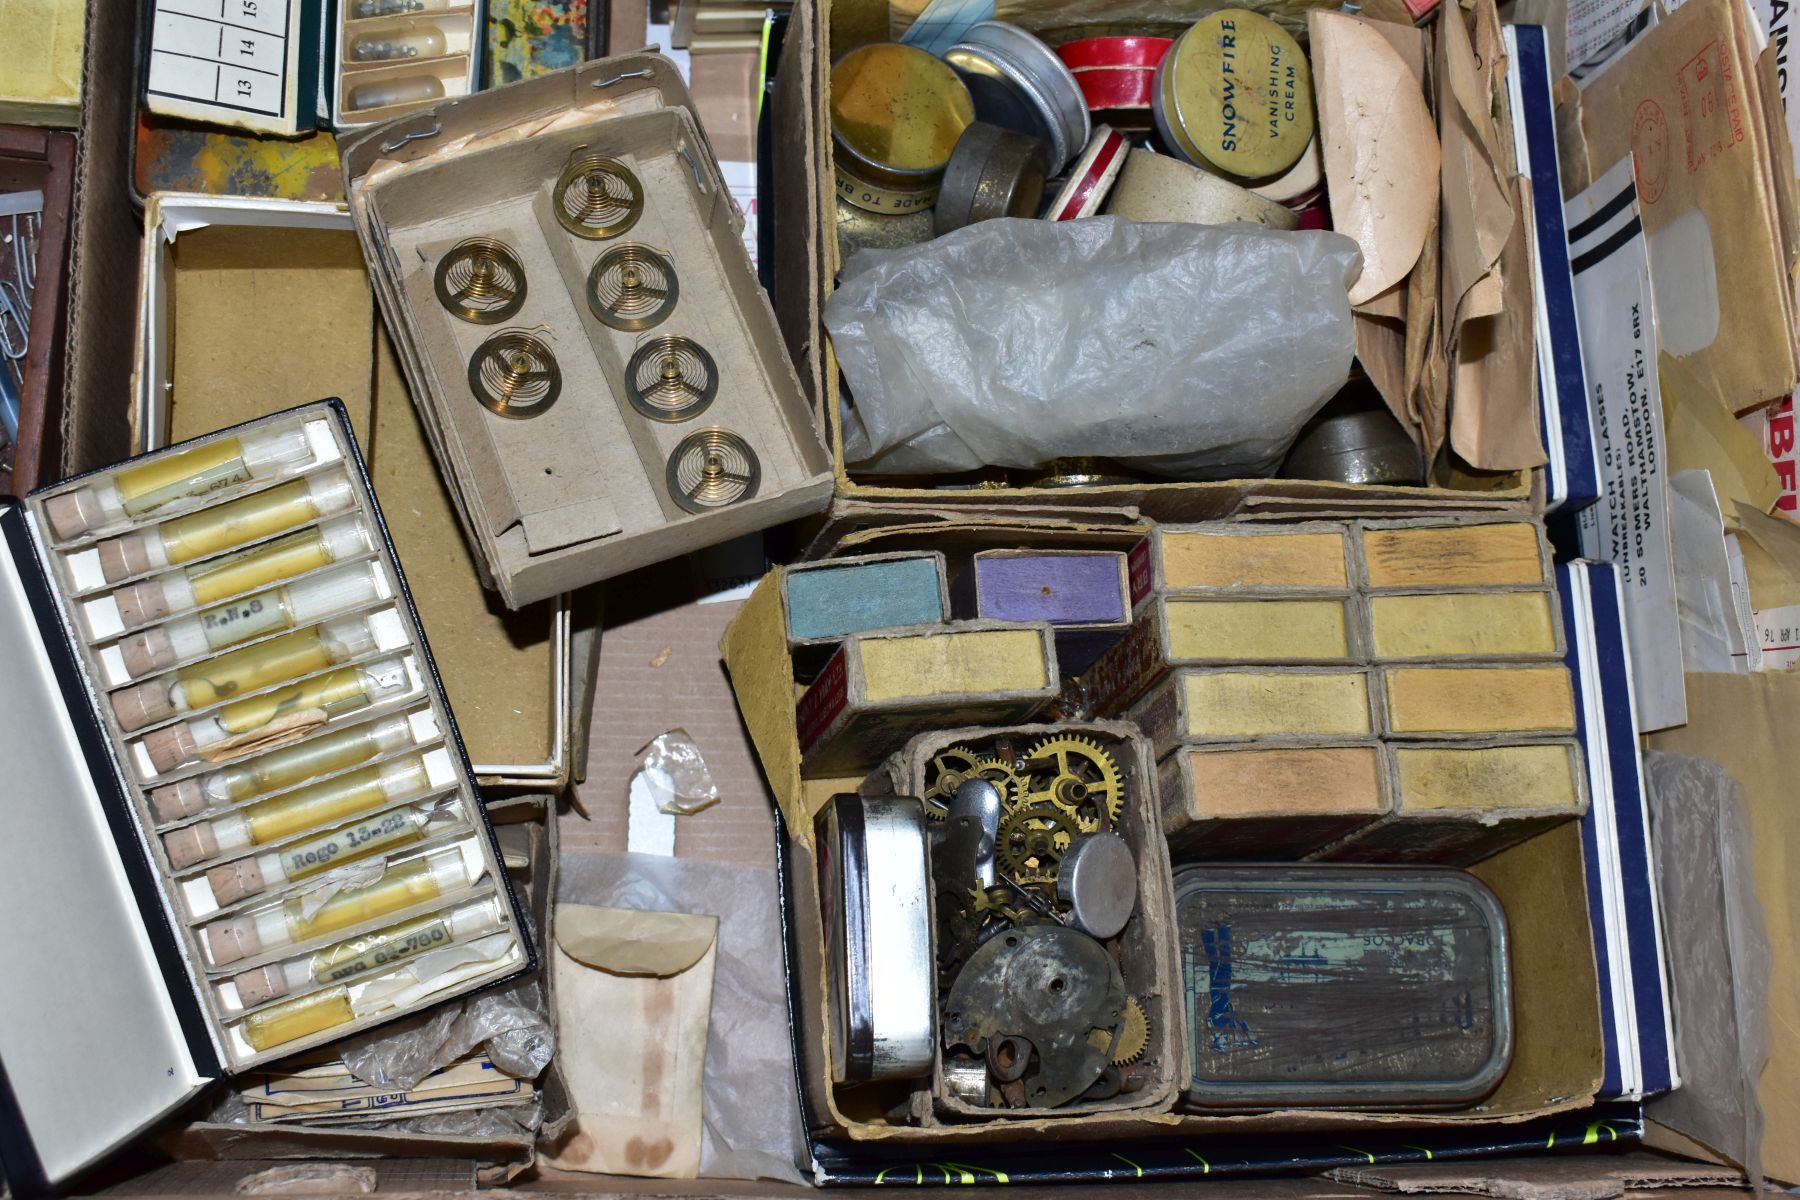 TWO BOXES OF ASSORTED WATCH MAKERS PARTS, GLASSES, COGS, SPRINGS, CROWNS, DECONSTTUCTED WATCH - Image 16 of 30